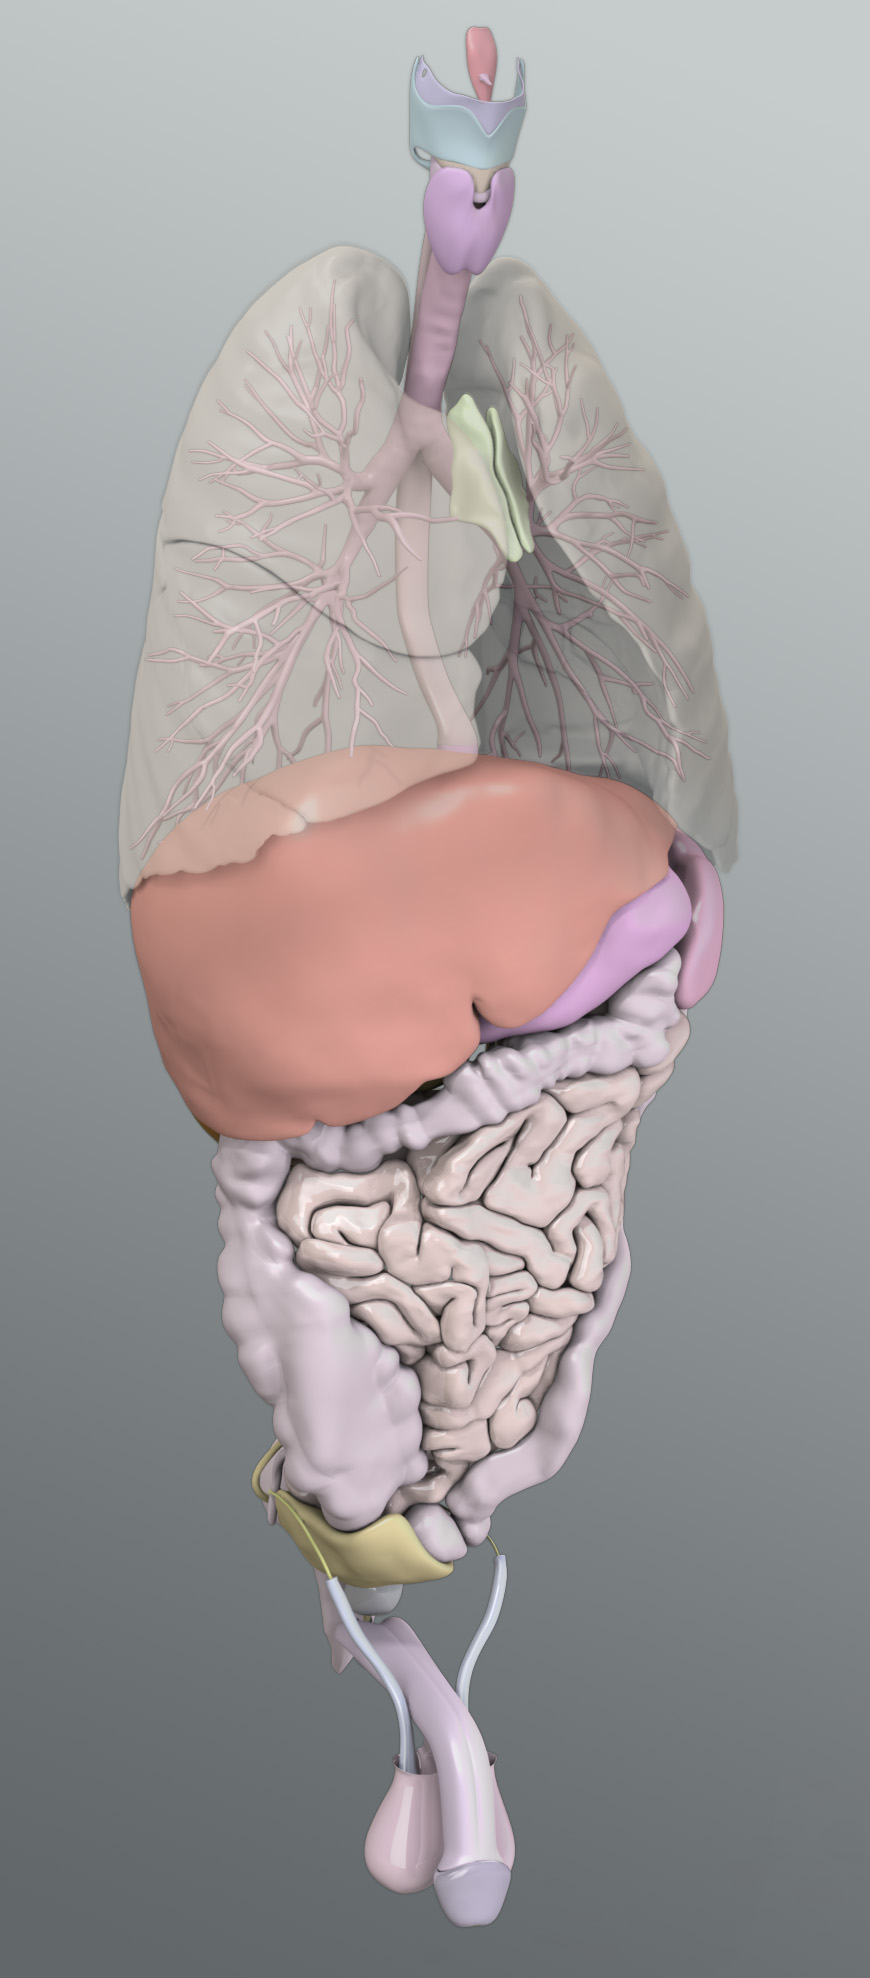 Zygote::Solid 3D Male Organs Model | Medically Accurate | Human Anatomy